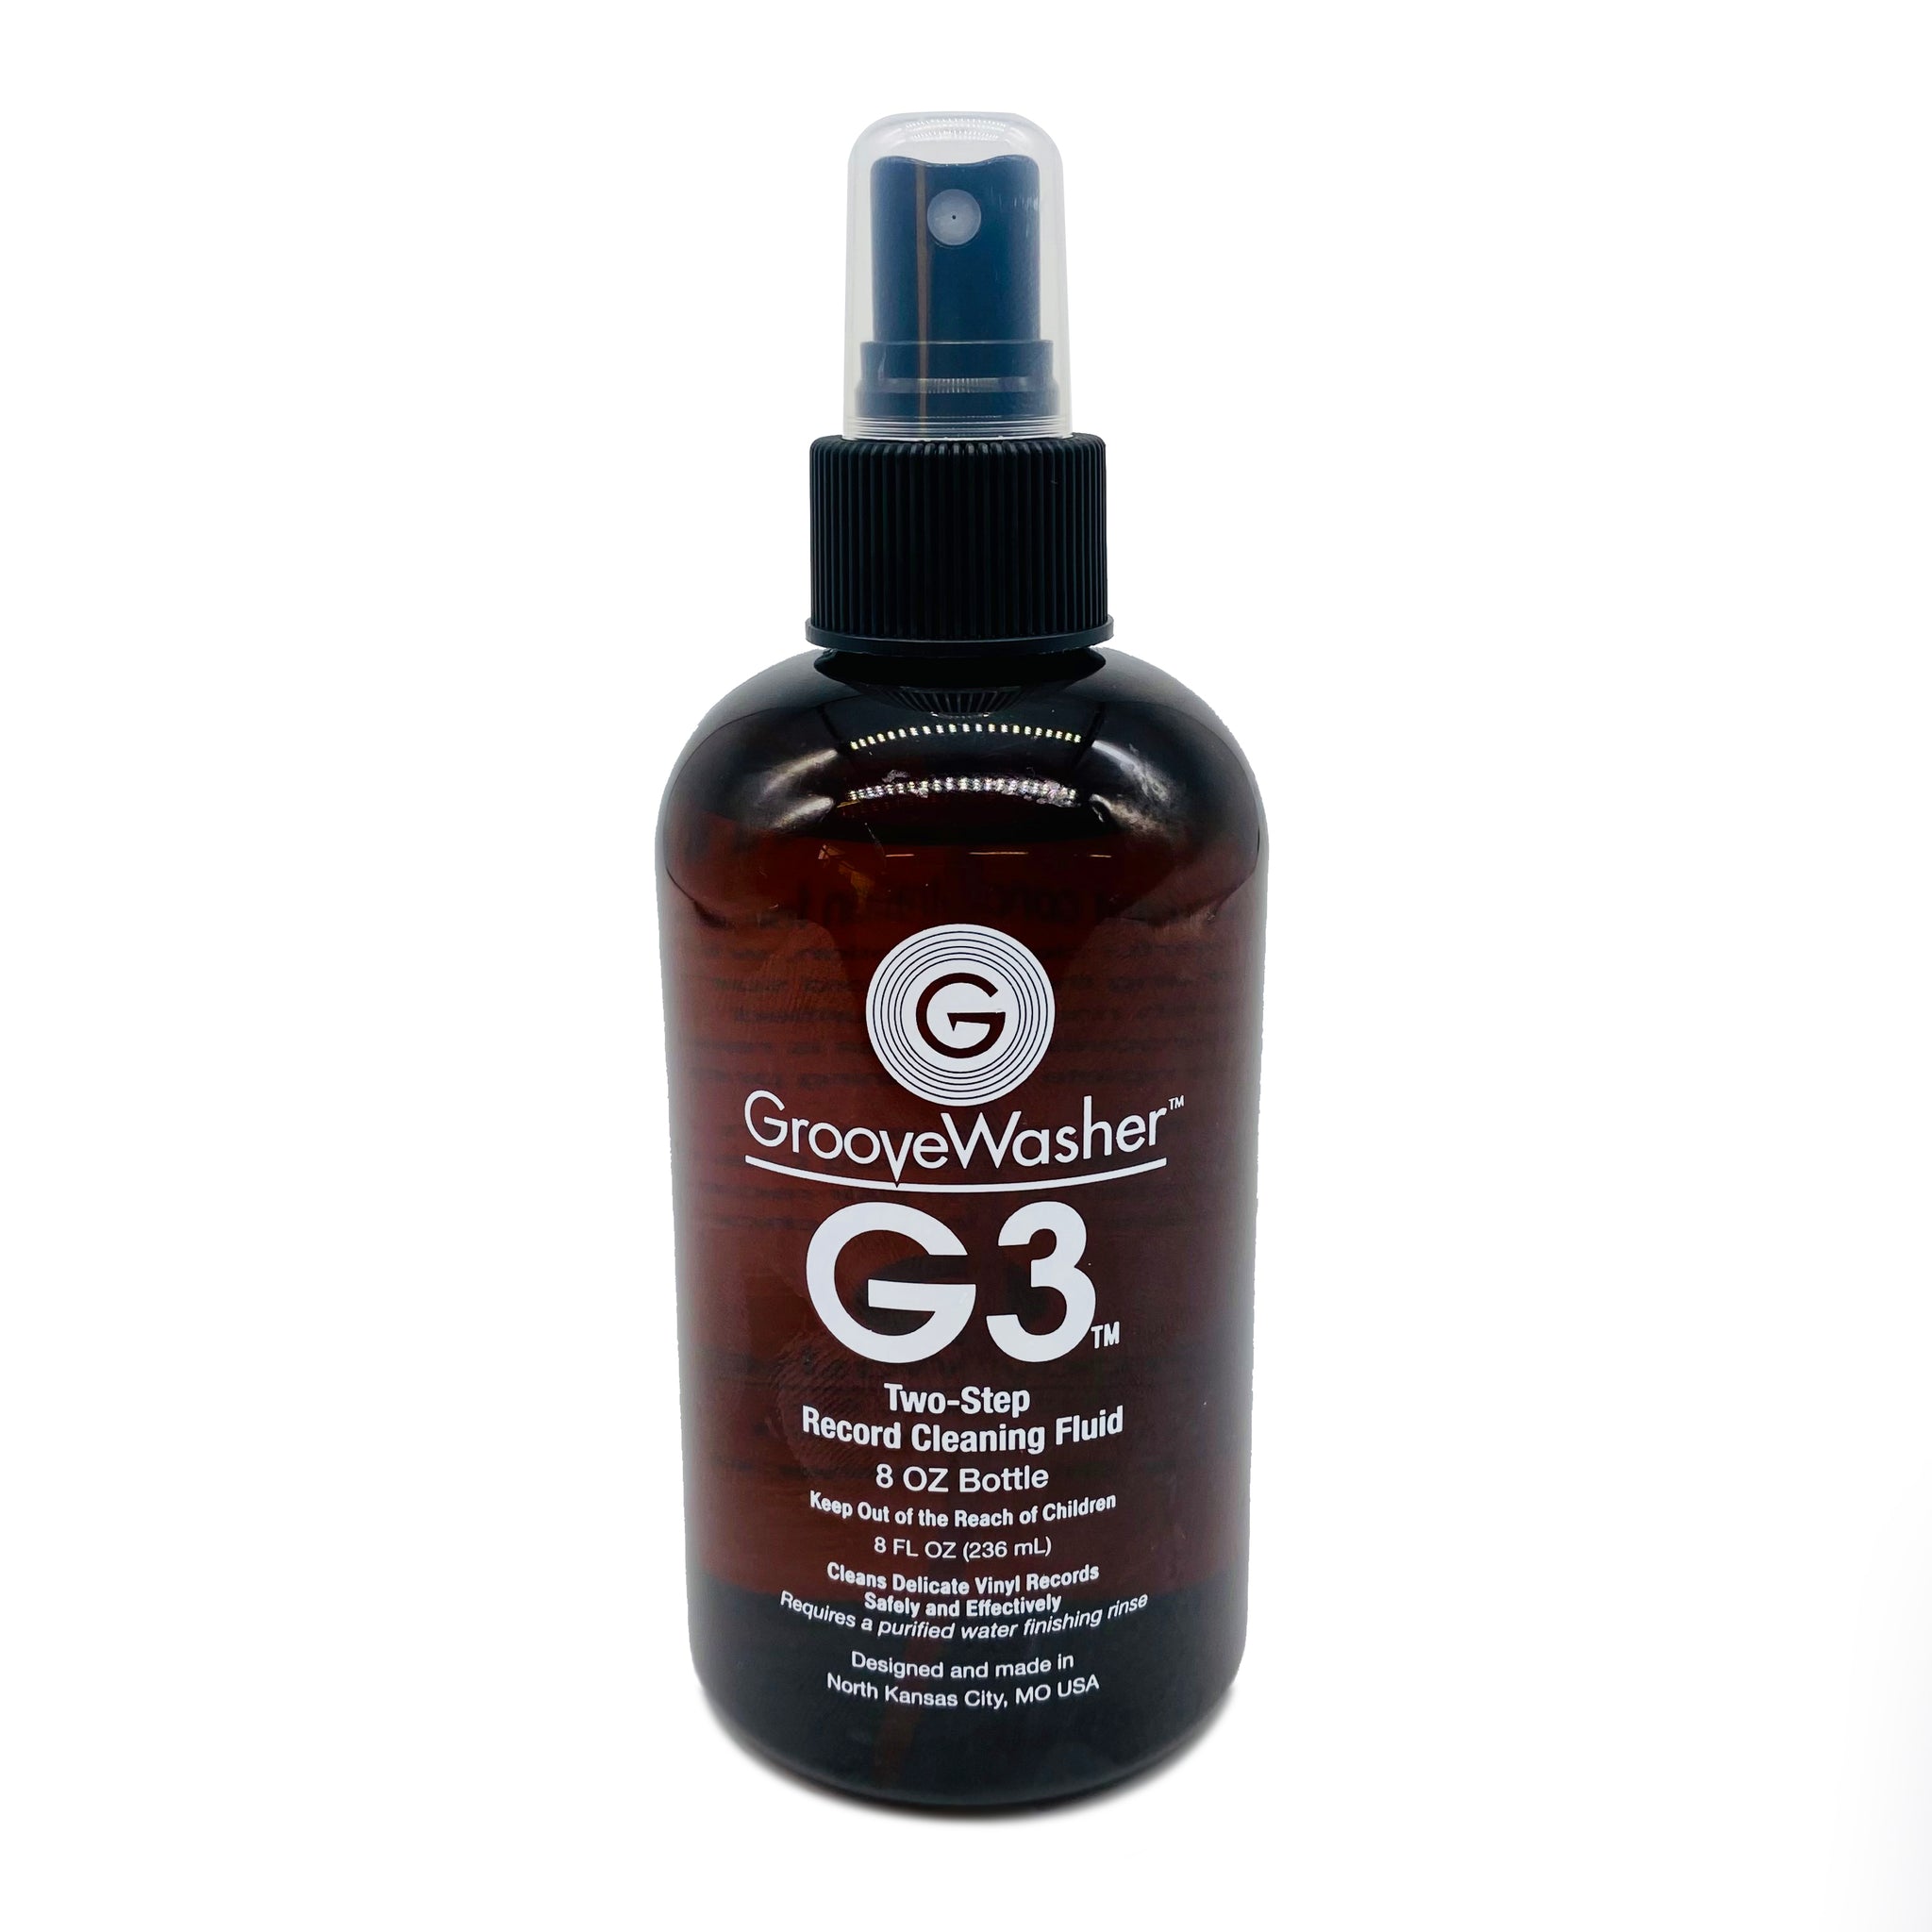 G3 Two•Step Record Cleaning Fluid - 8oz Bottle